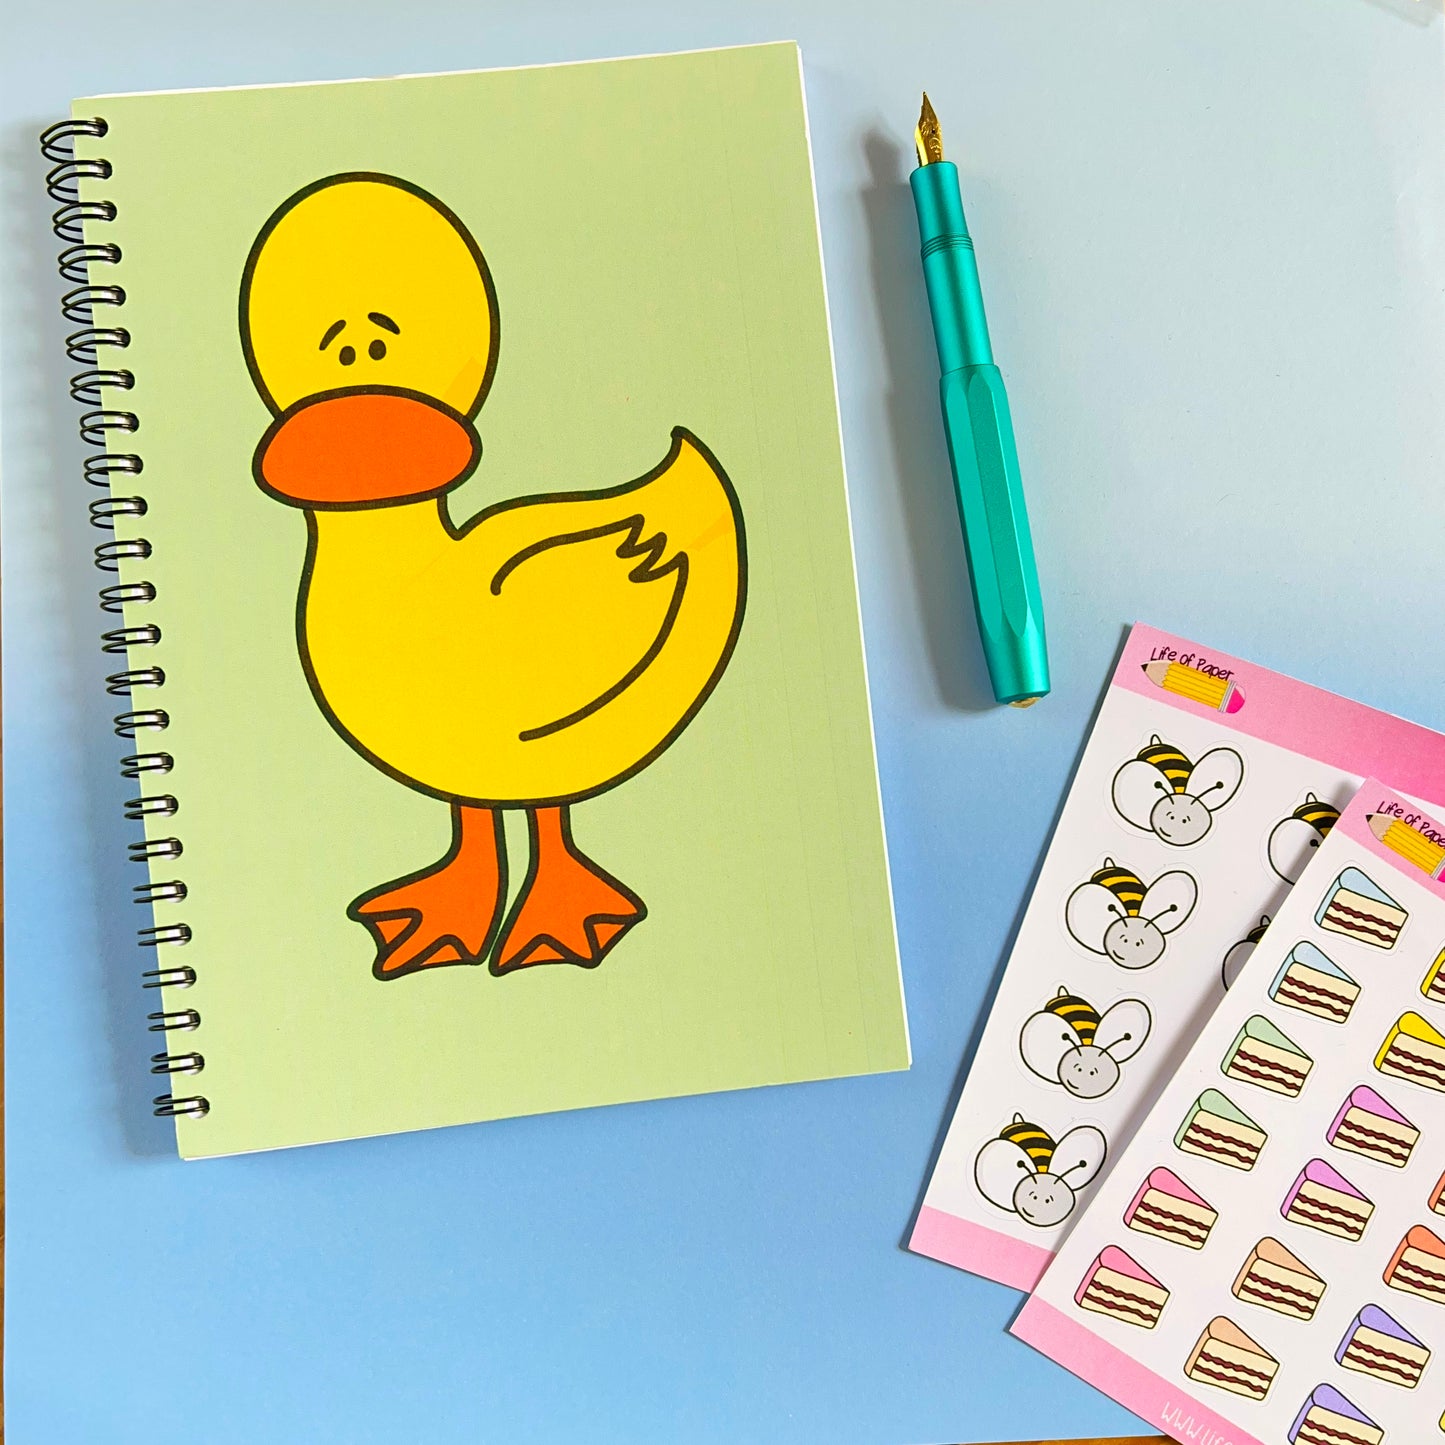 A Worried Duck Notebook with a cartoon duck on the cover is placed on a light blue surface. To the right of the notebook is a teal fountain pen and two sheets of colorful stickers featuring animal faces and layered cakes, perfect for note-taking.